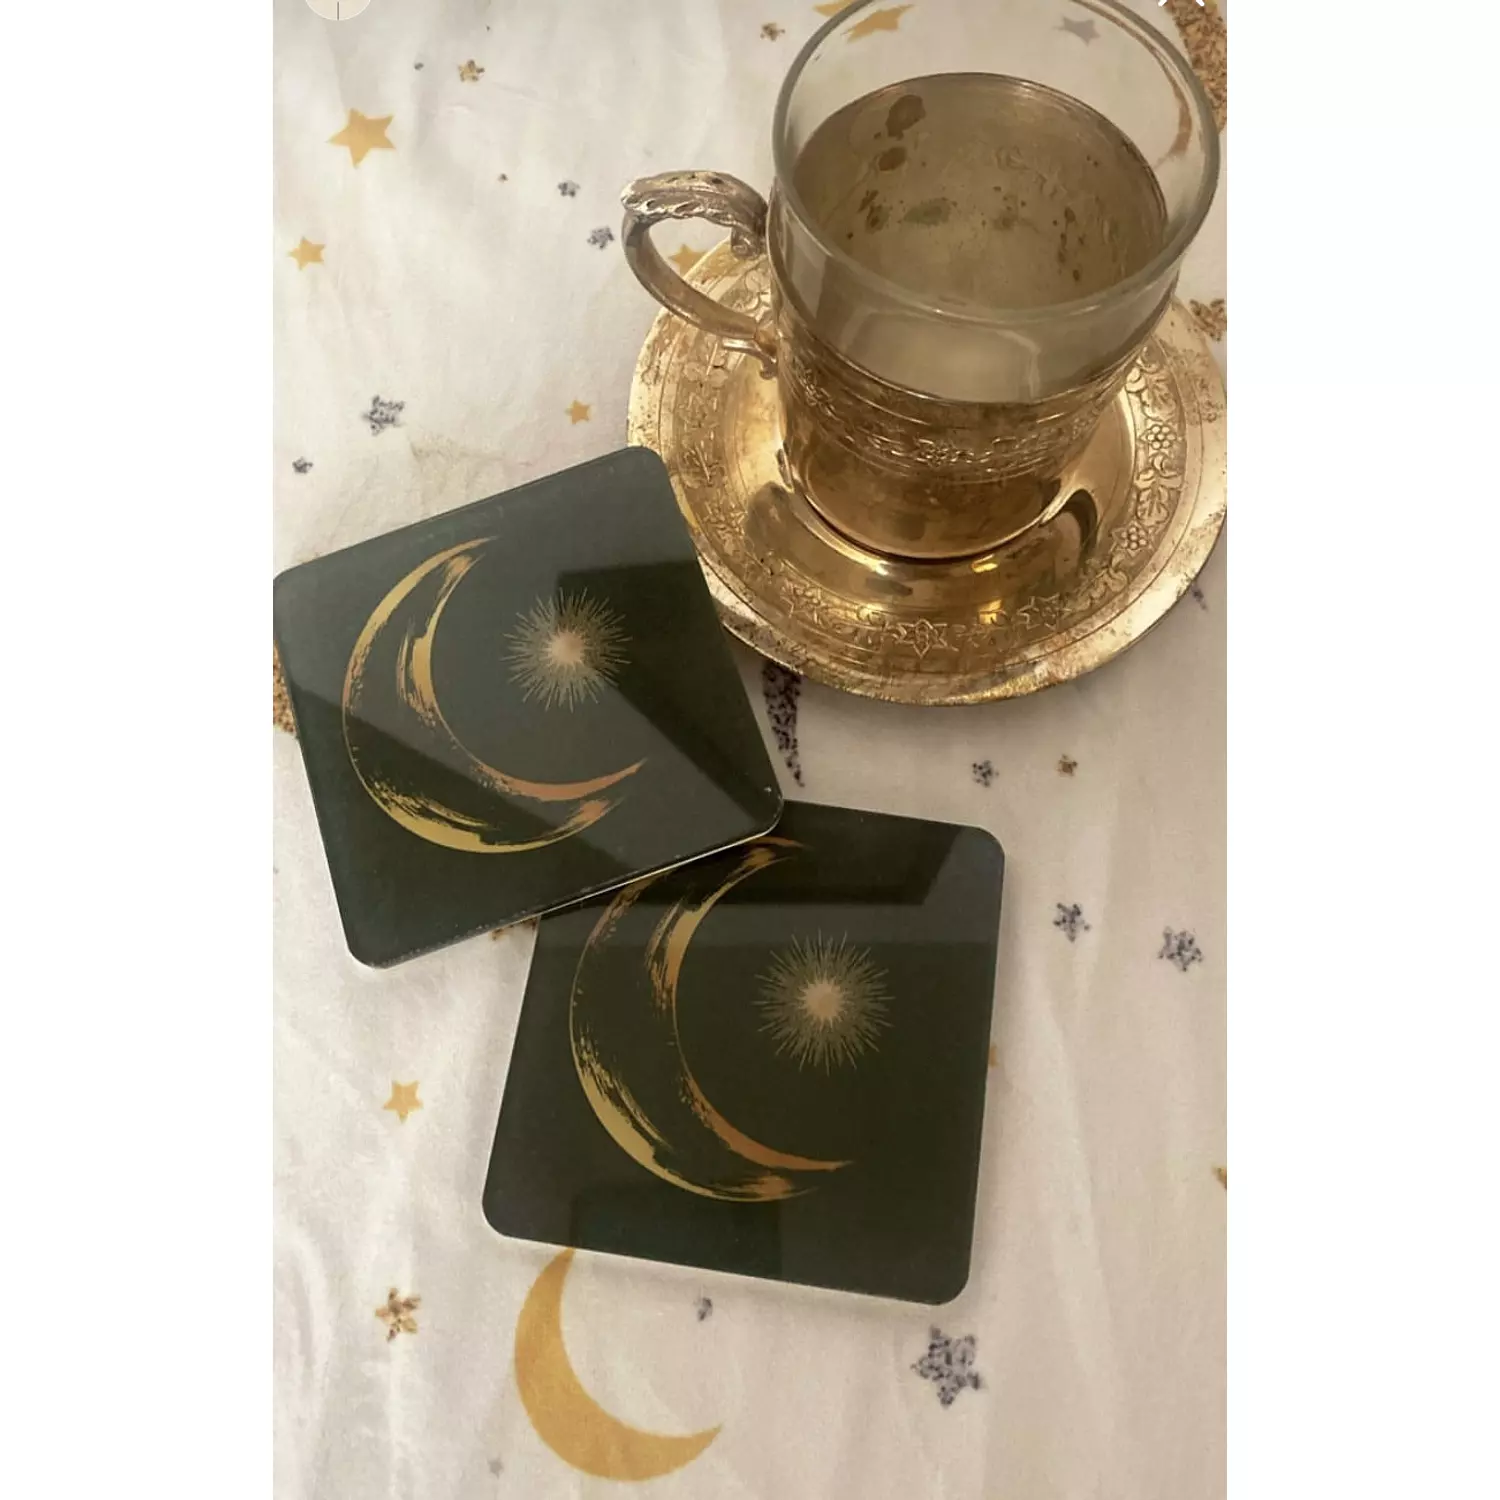 The Olive Green Moon Coaster Set hover image